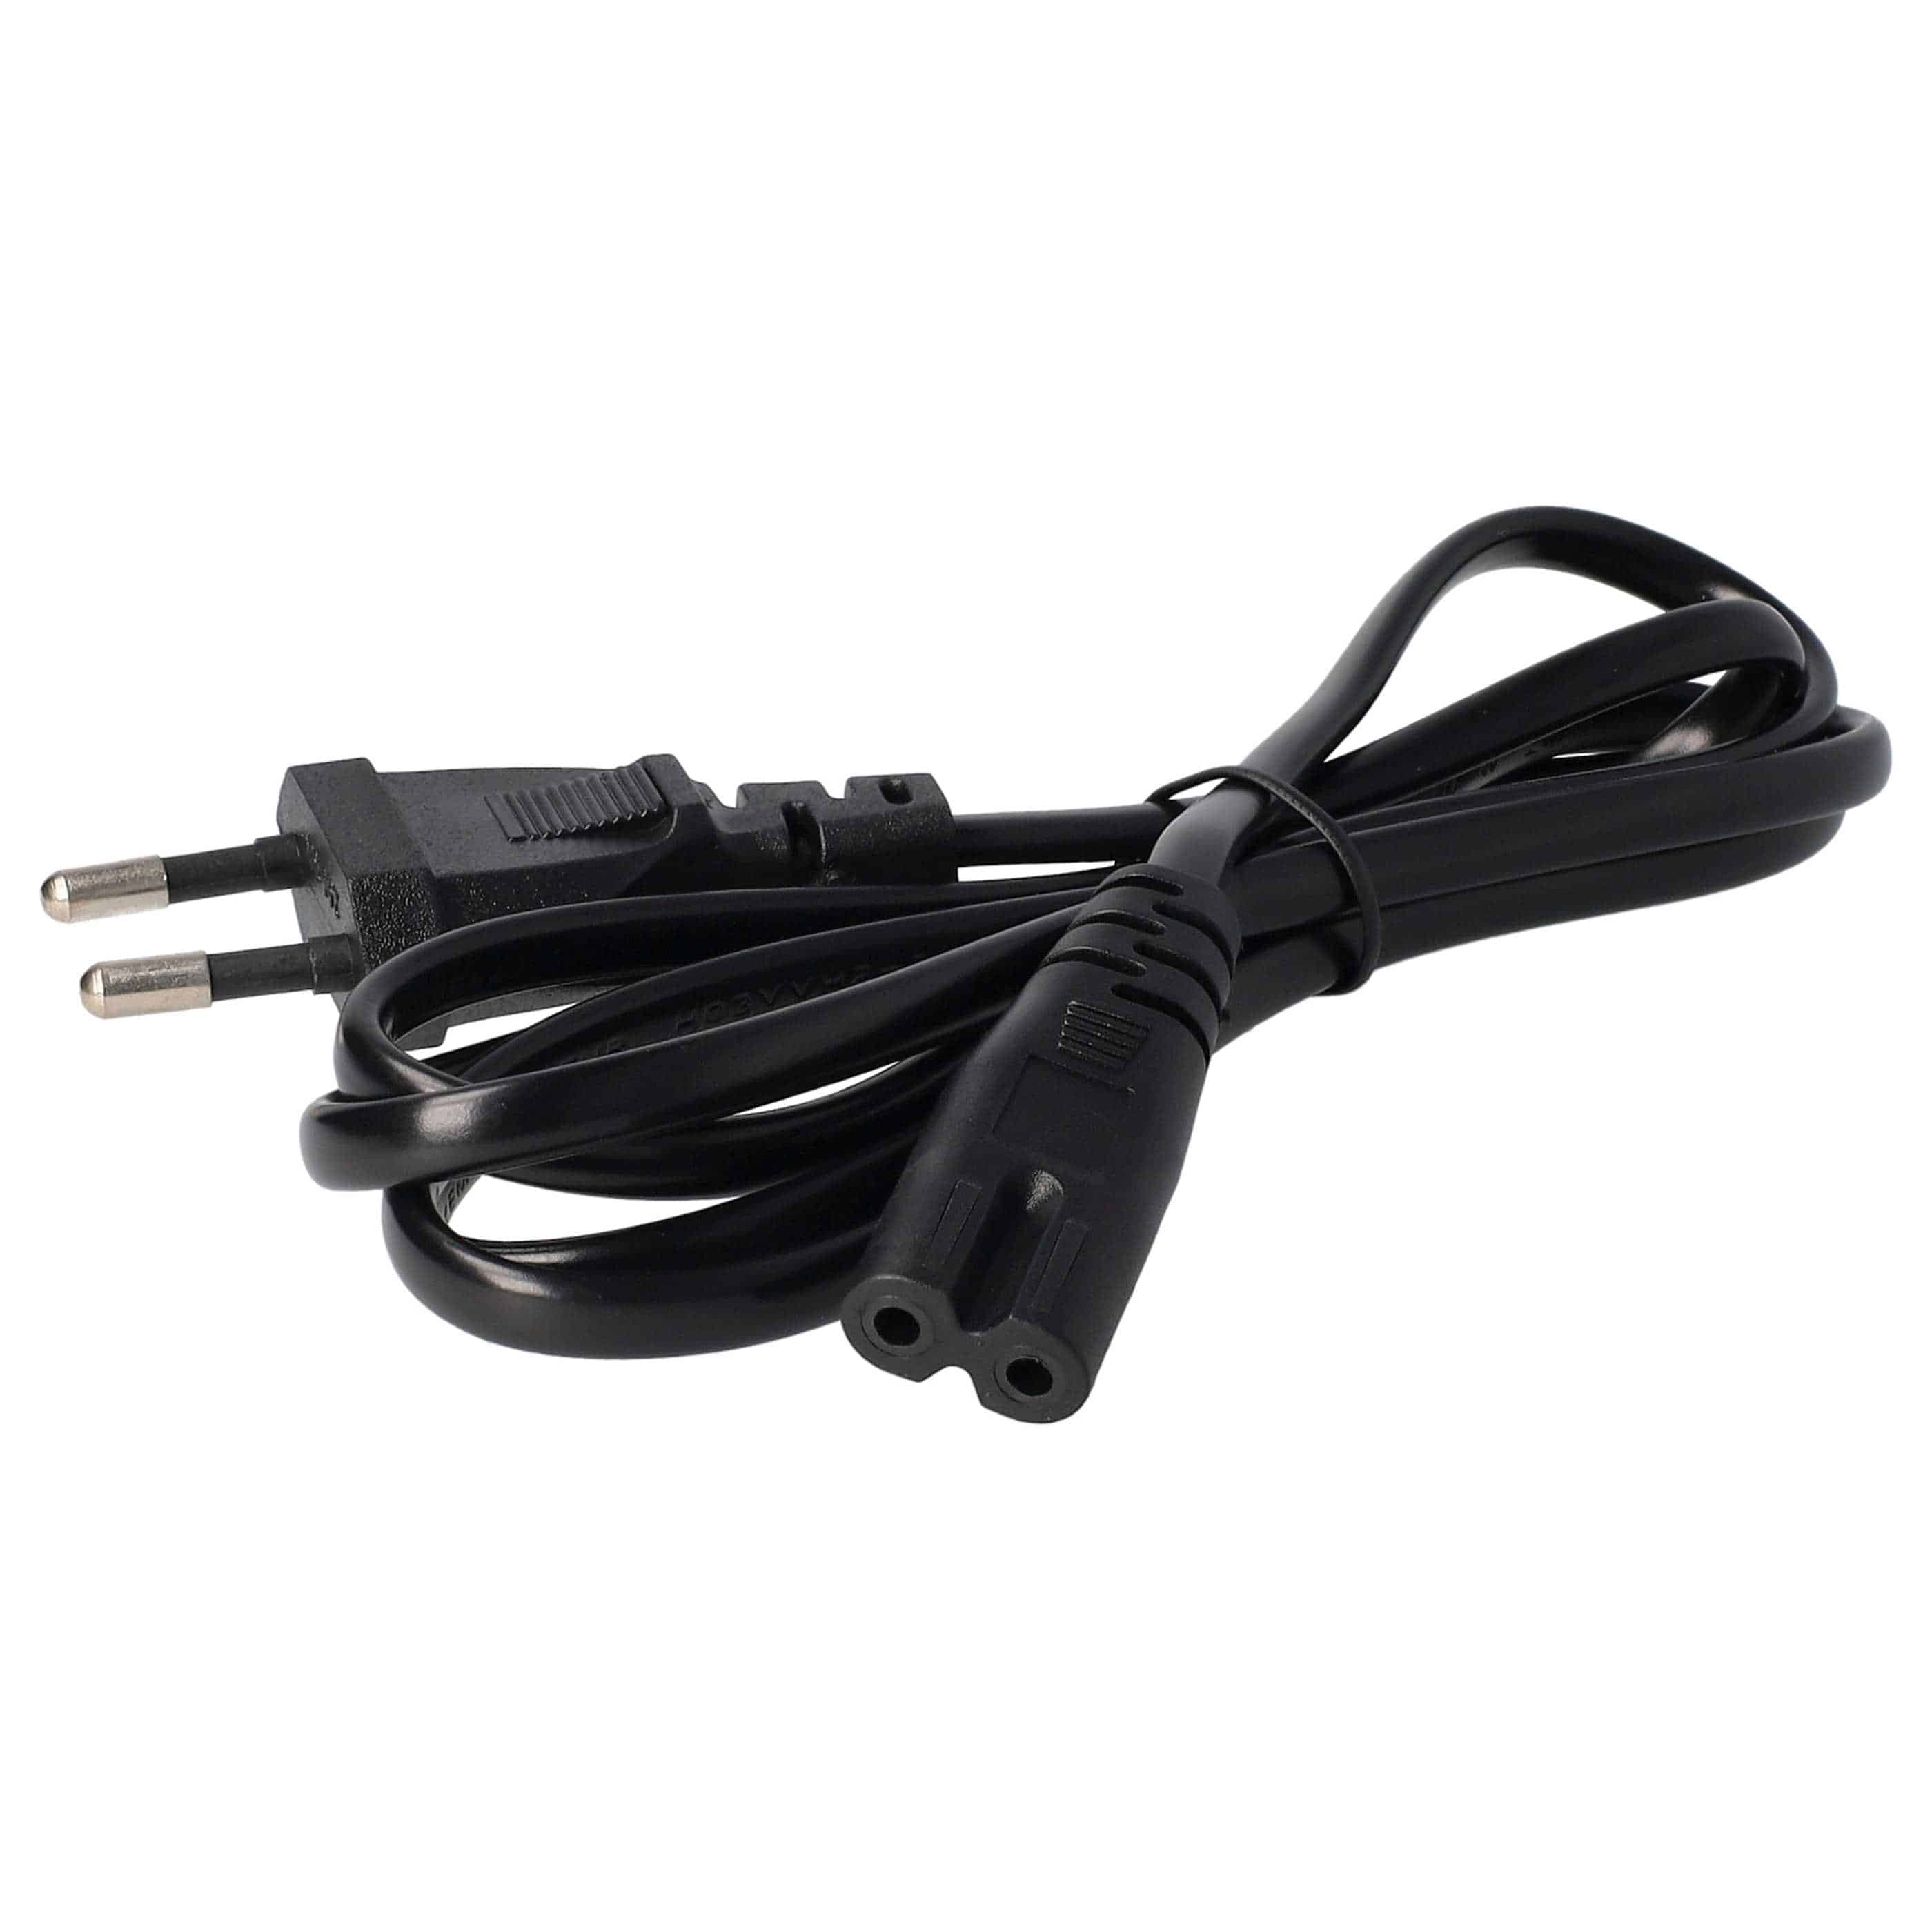 Mains Power Adapter replaces Samsung AD-3014, 14030GPCN, A3014VE for DellNotebook etc. - 200 cm, 42 W